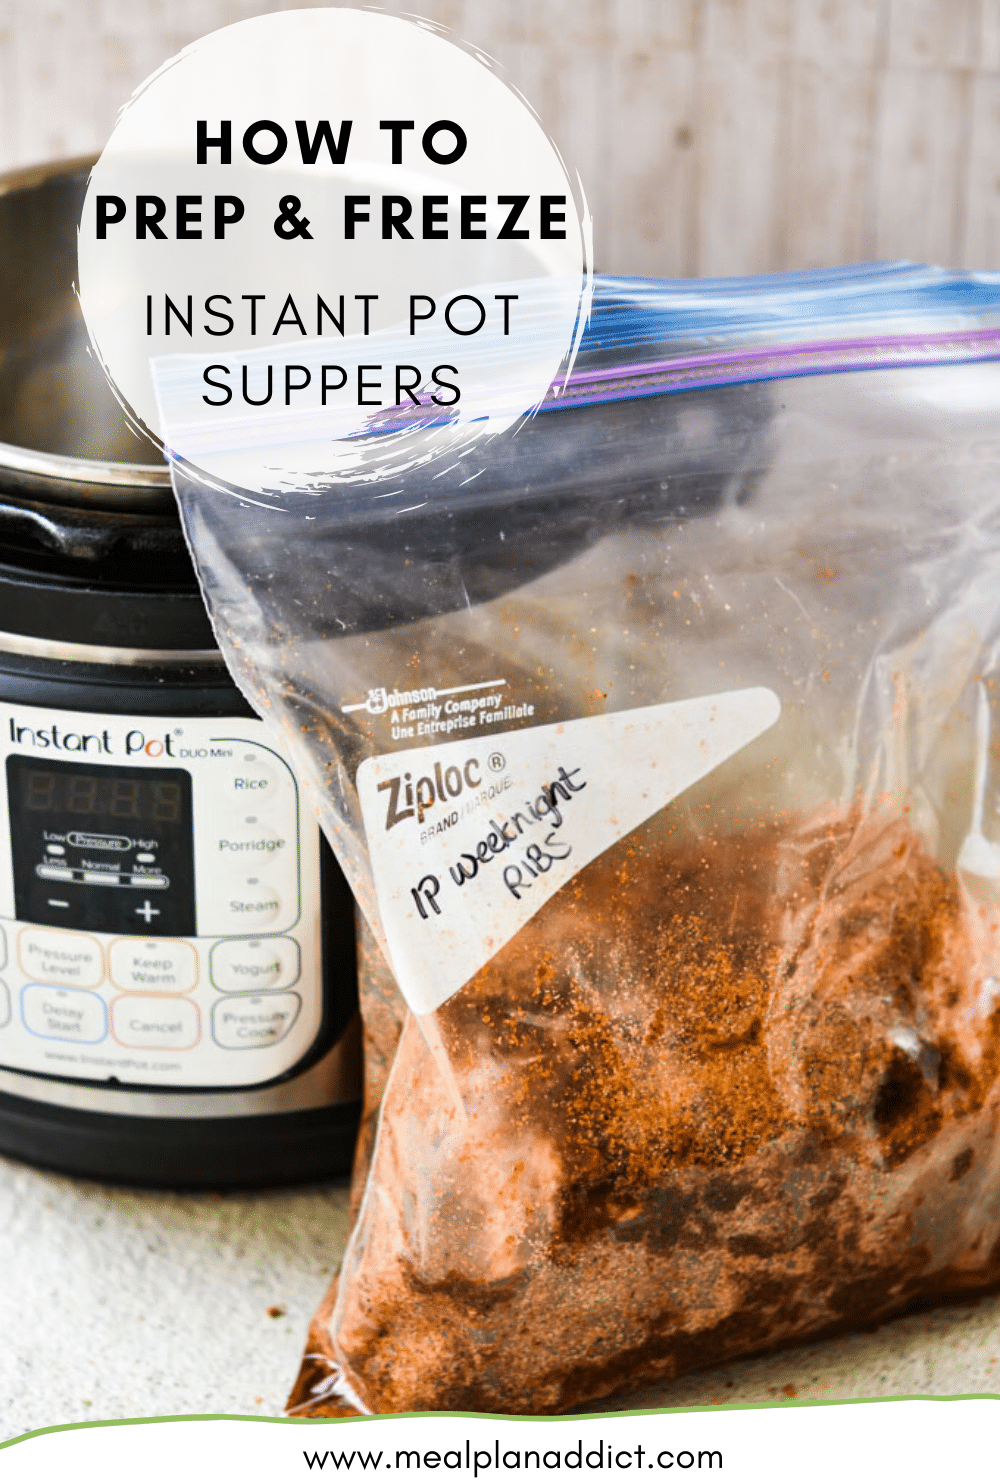 How to prep & freeze Instant Pot suppers